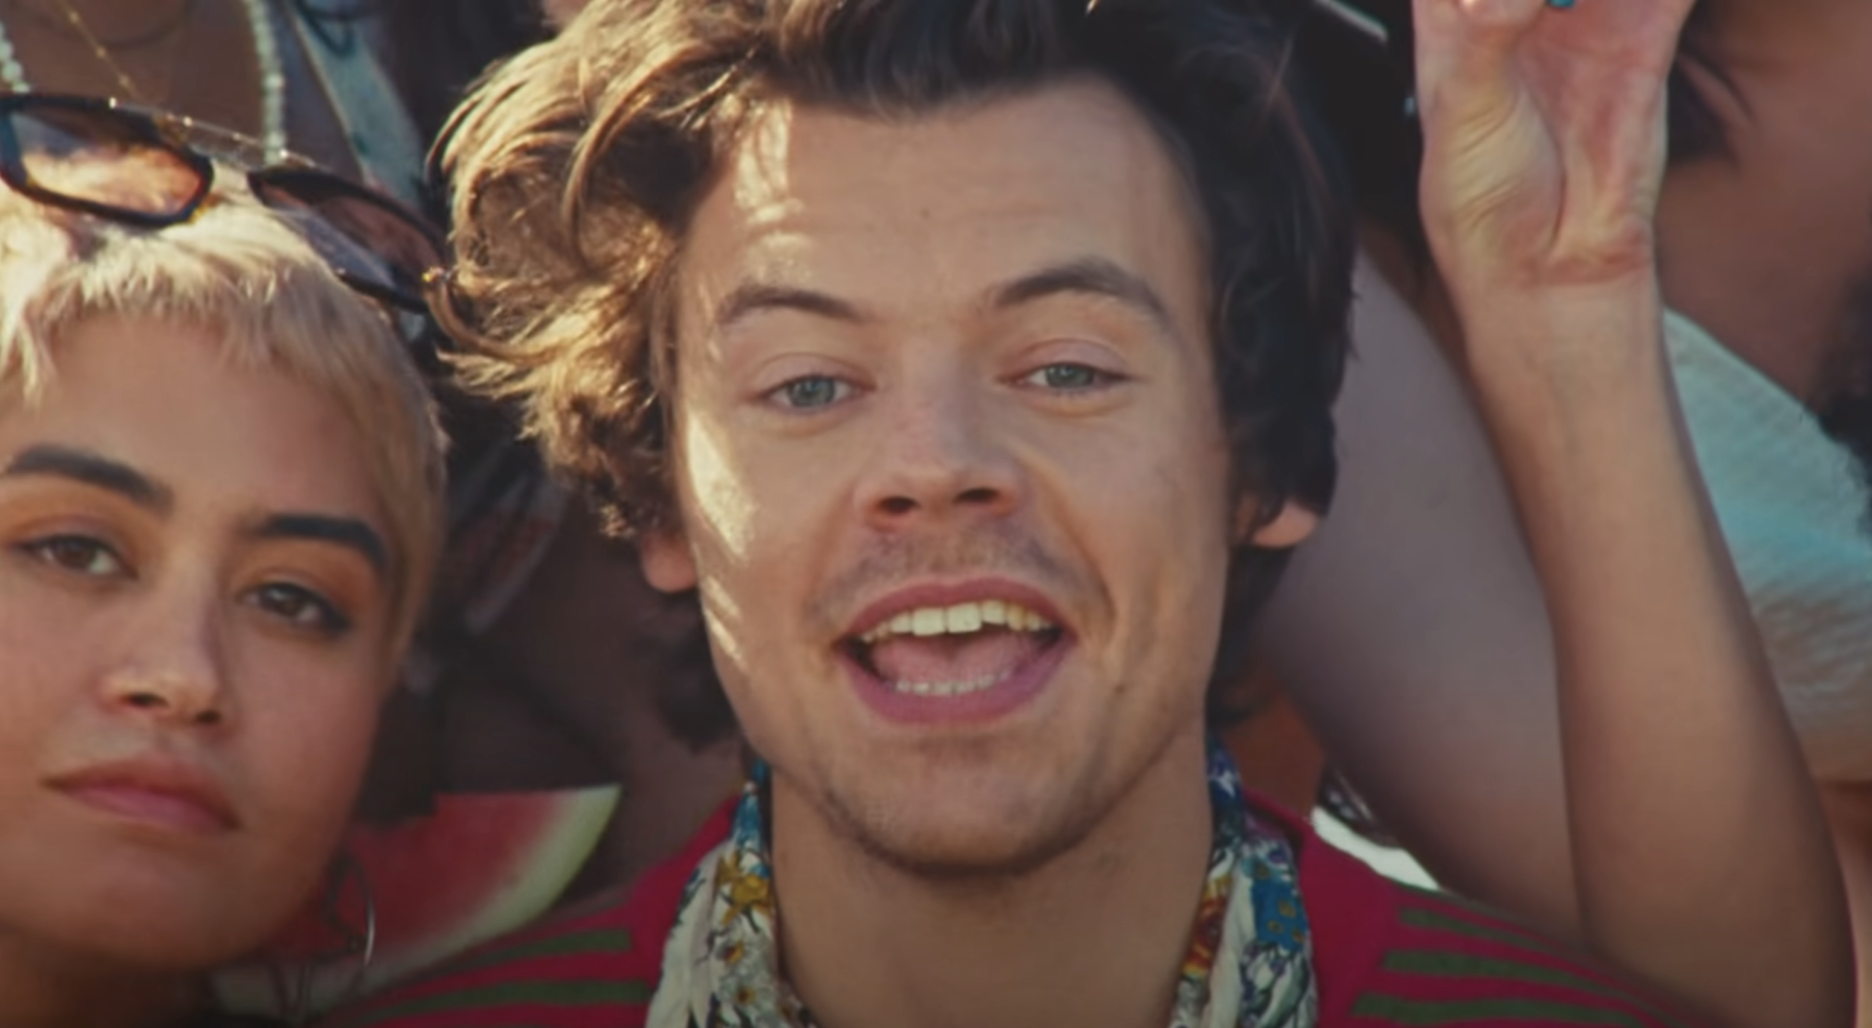 Harry smiling in the &quot;Watermelon Sugar&quot; music video